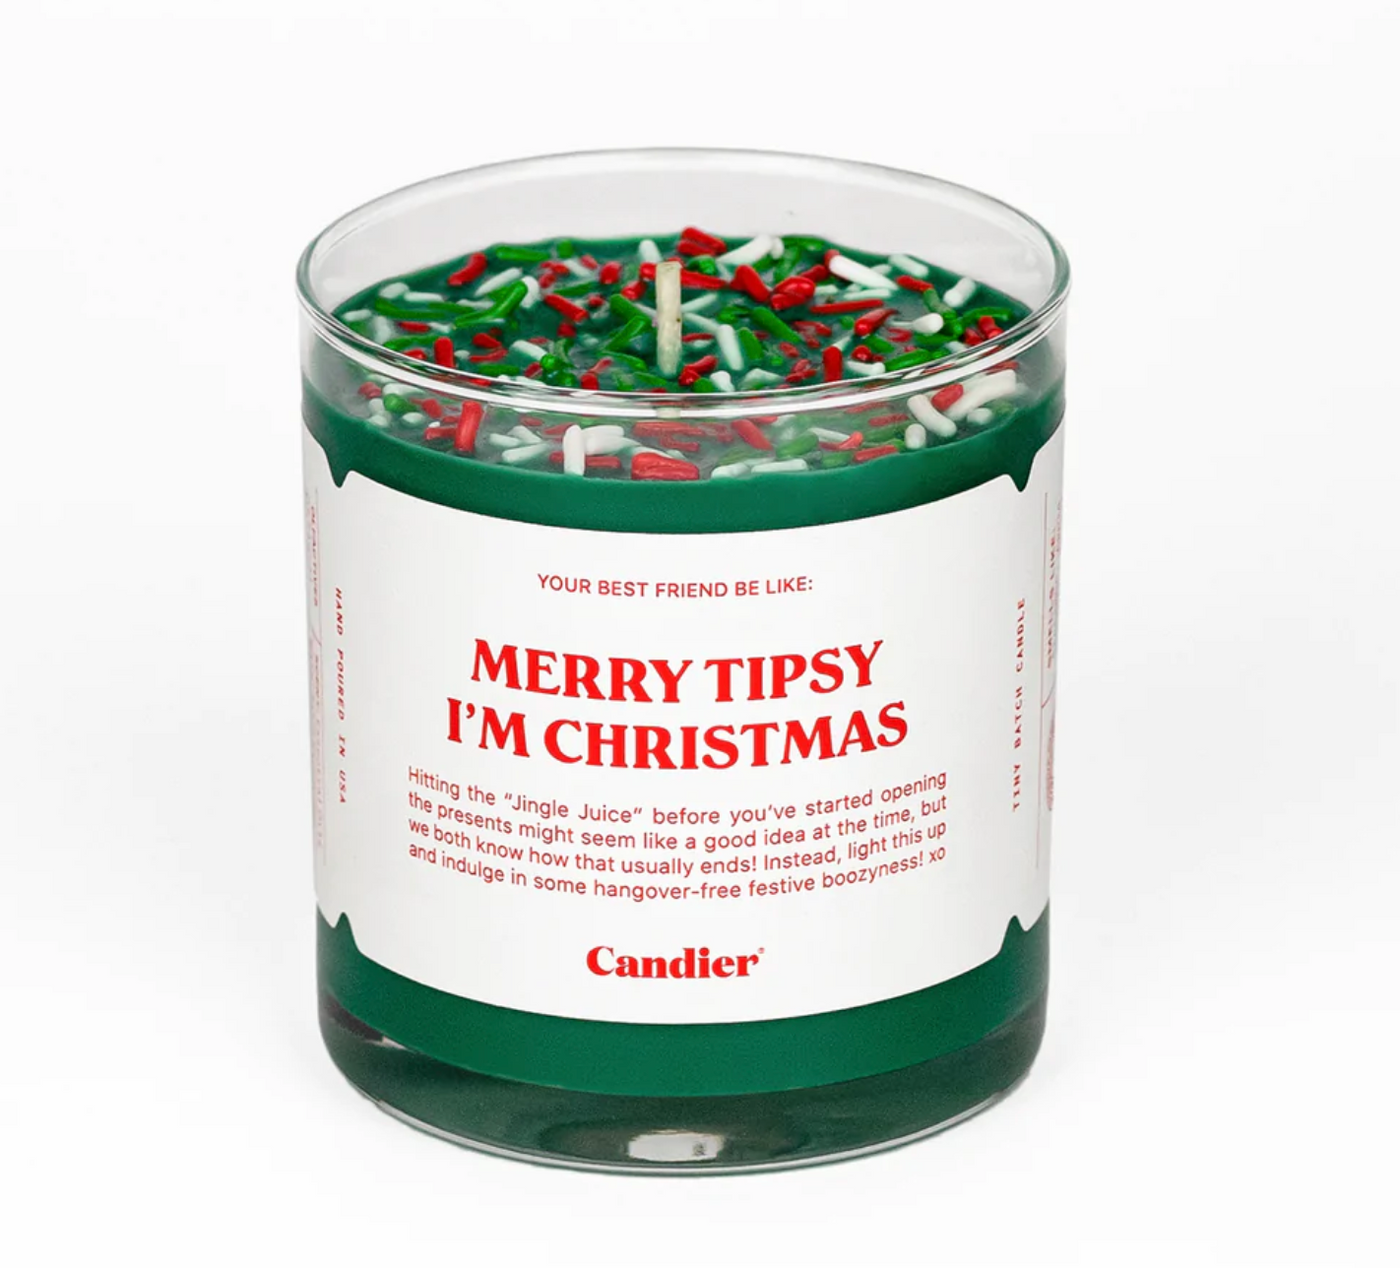 Merry Tipsy Candle